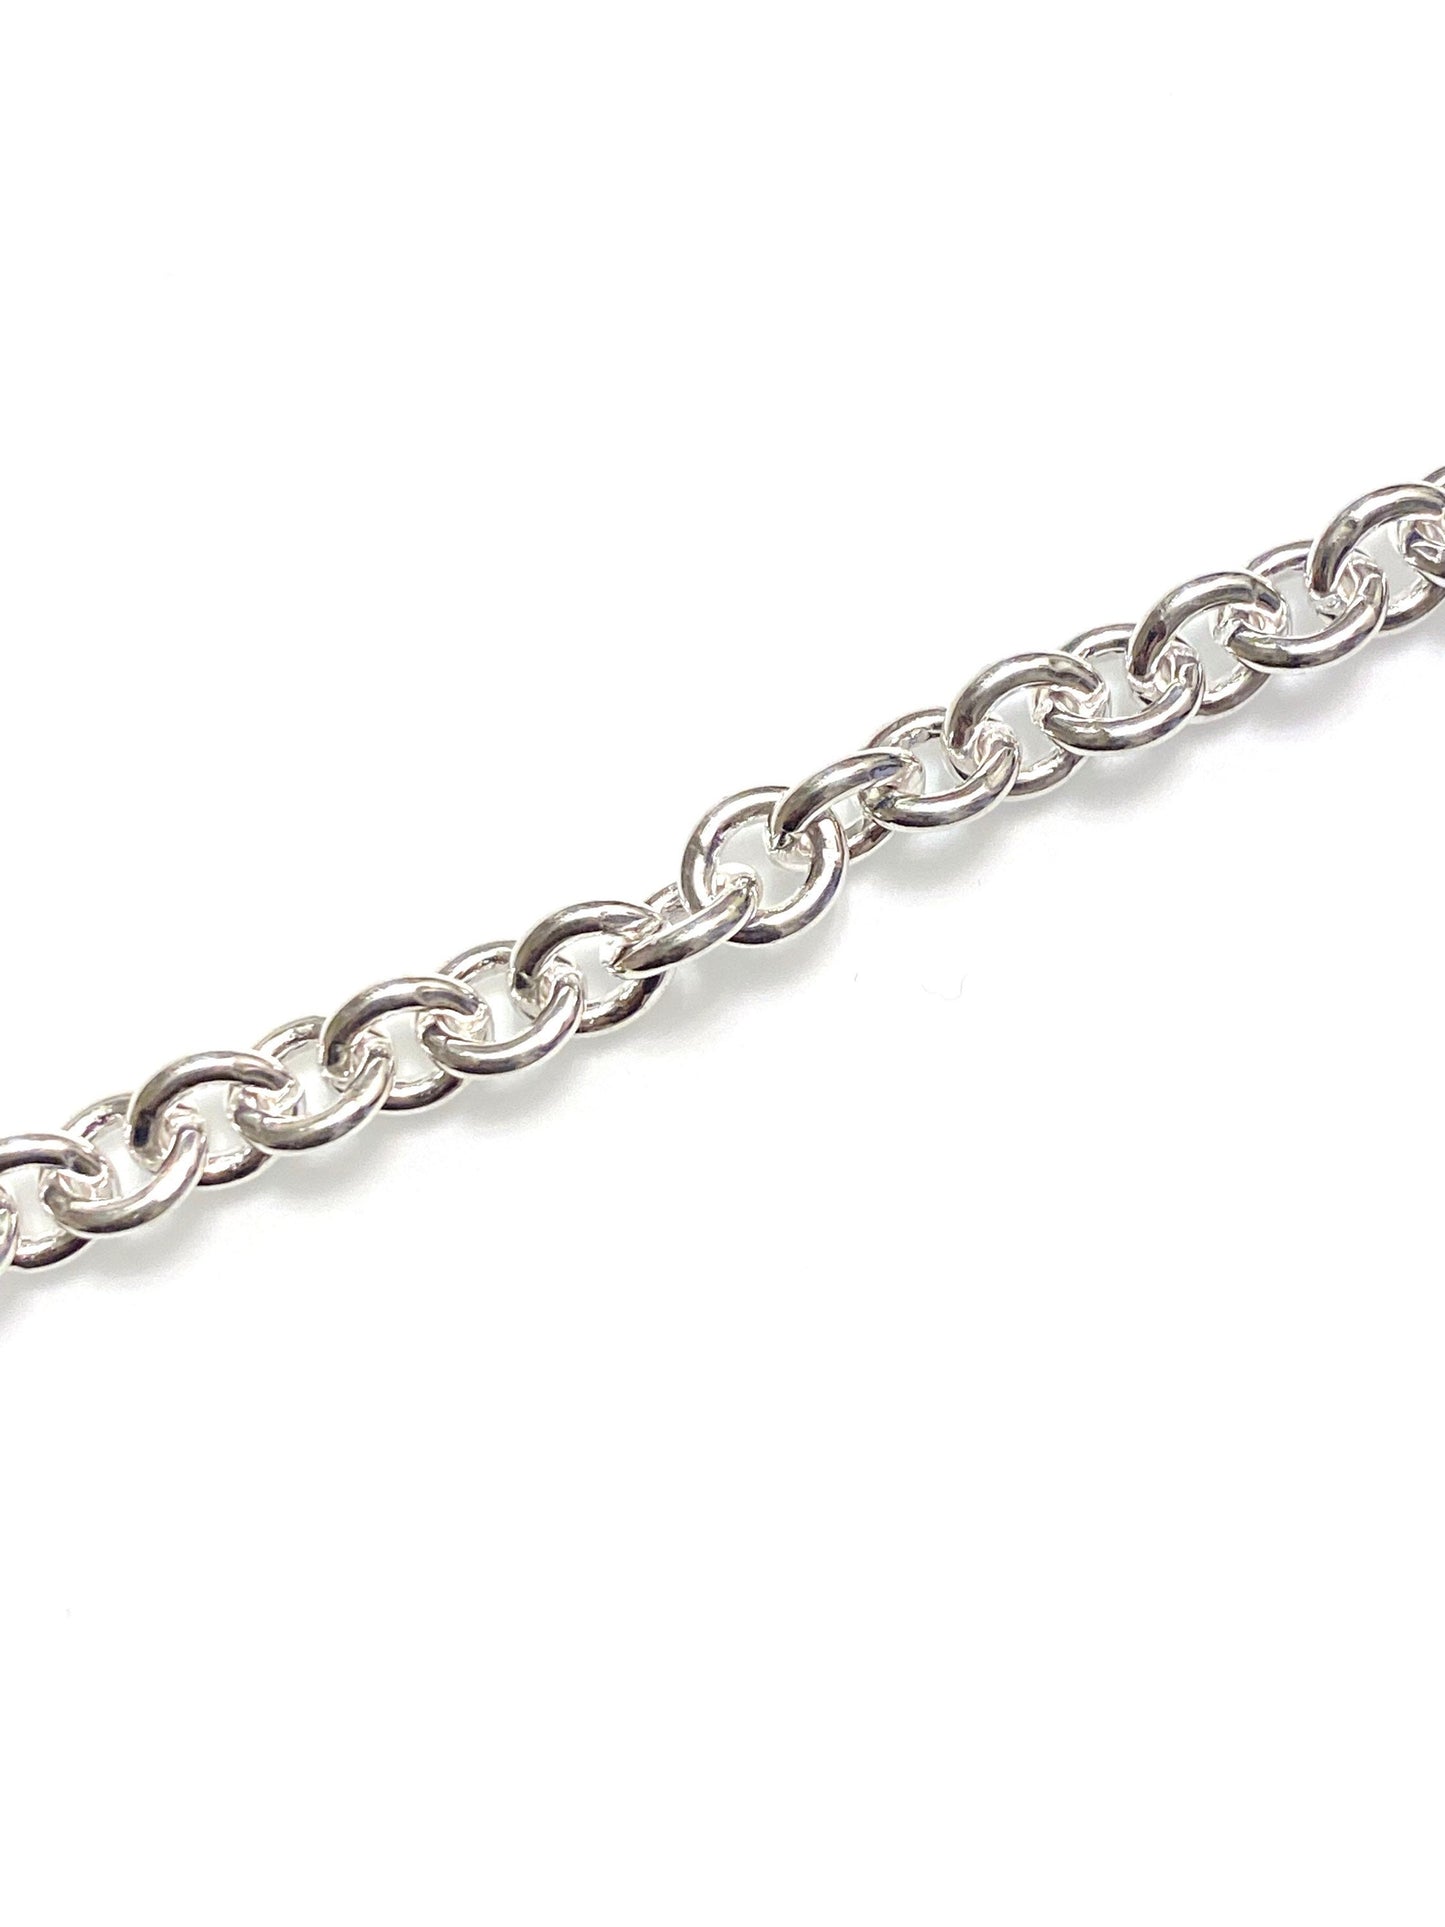 Chunky anchor chain bracelet (sterling silver)